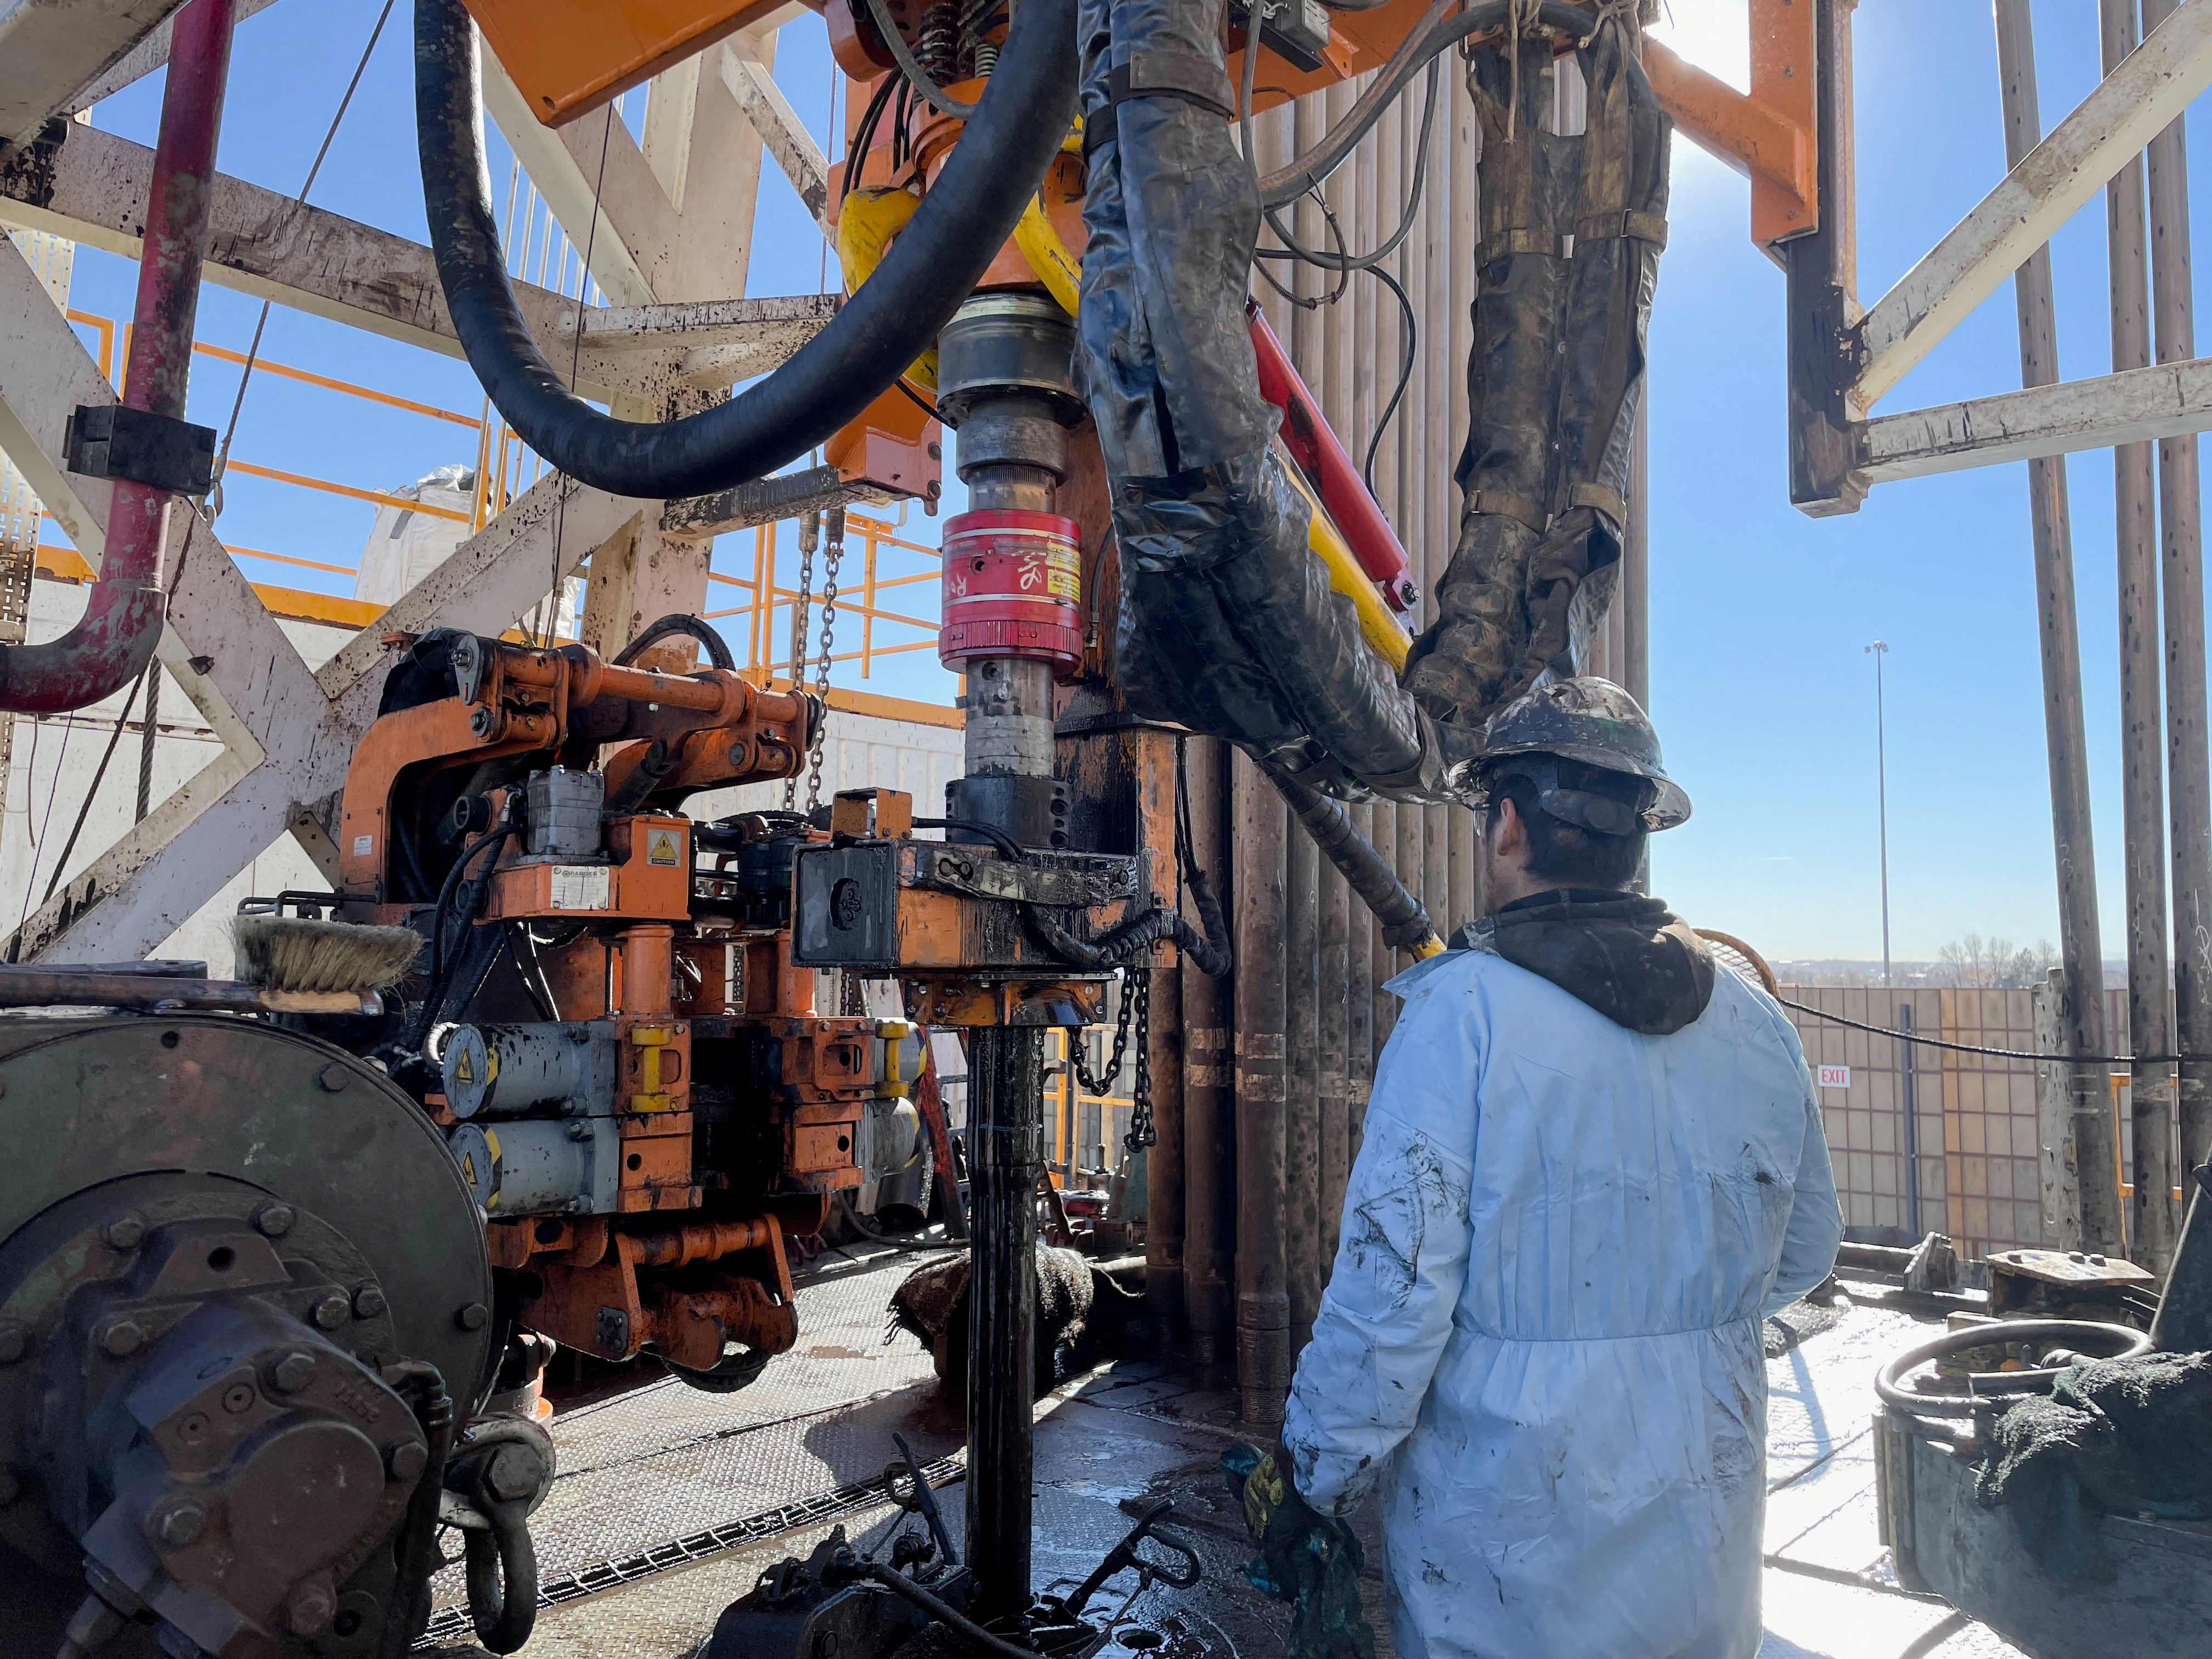 A rig hand works on an electric drilling rig for oil producer Civitas Resources, at the Denver suburbs, in Broomfield, Colorado, U.S, December 2, 2021. Picture taken December 2, 2021. REUTERS/Liz Hampton